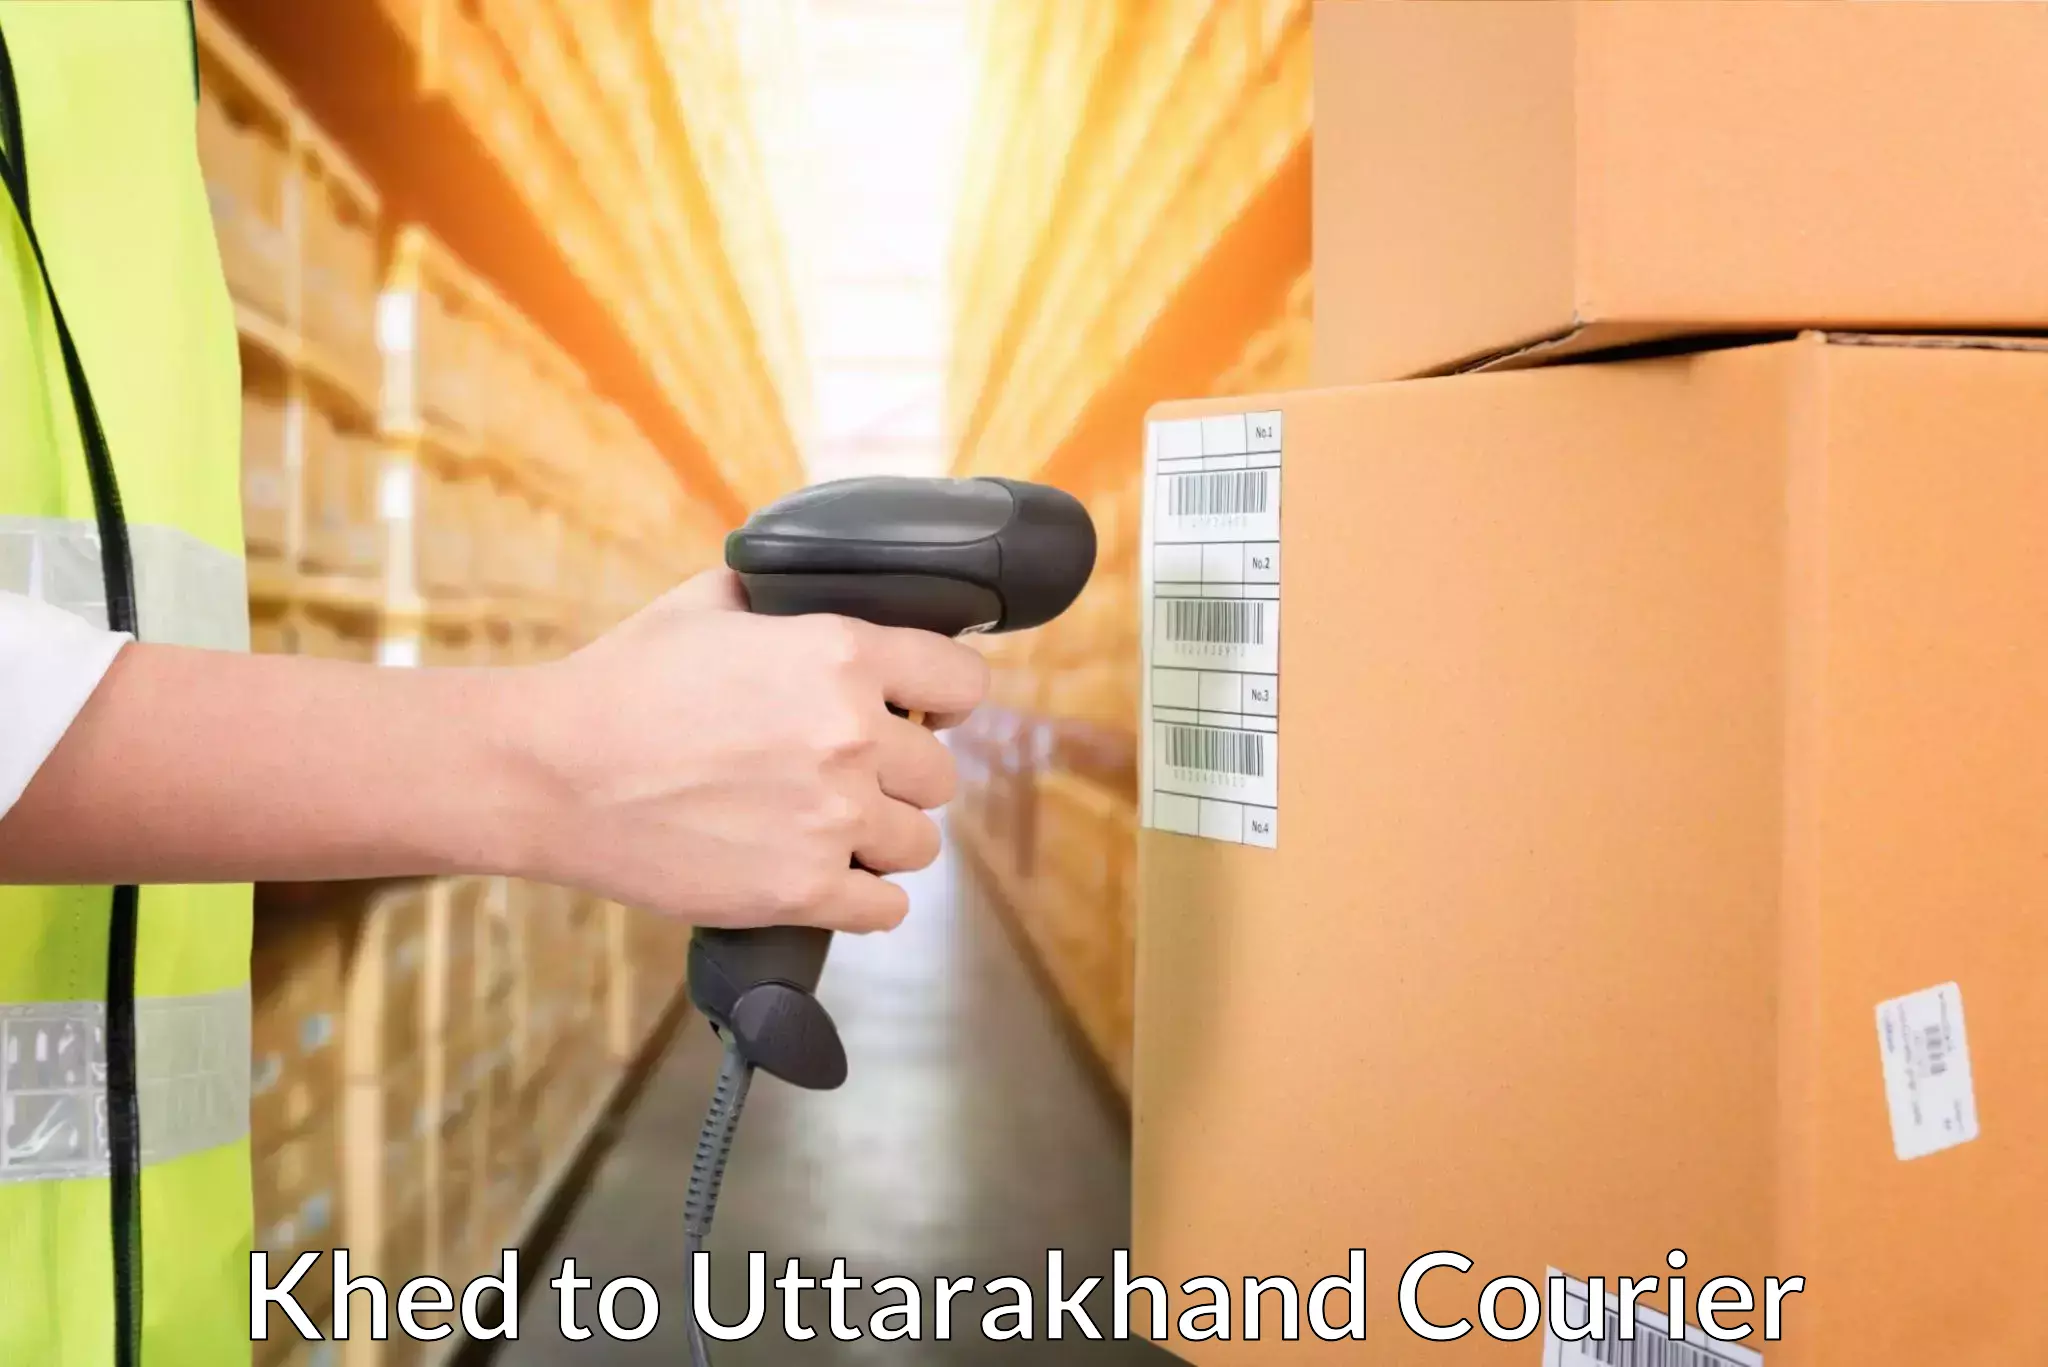 Supply chain efficiency Khed to Uttarakhand